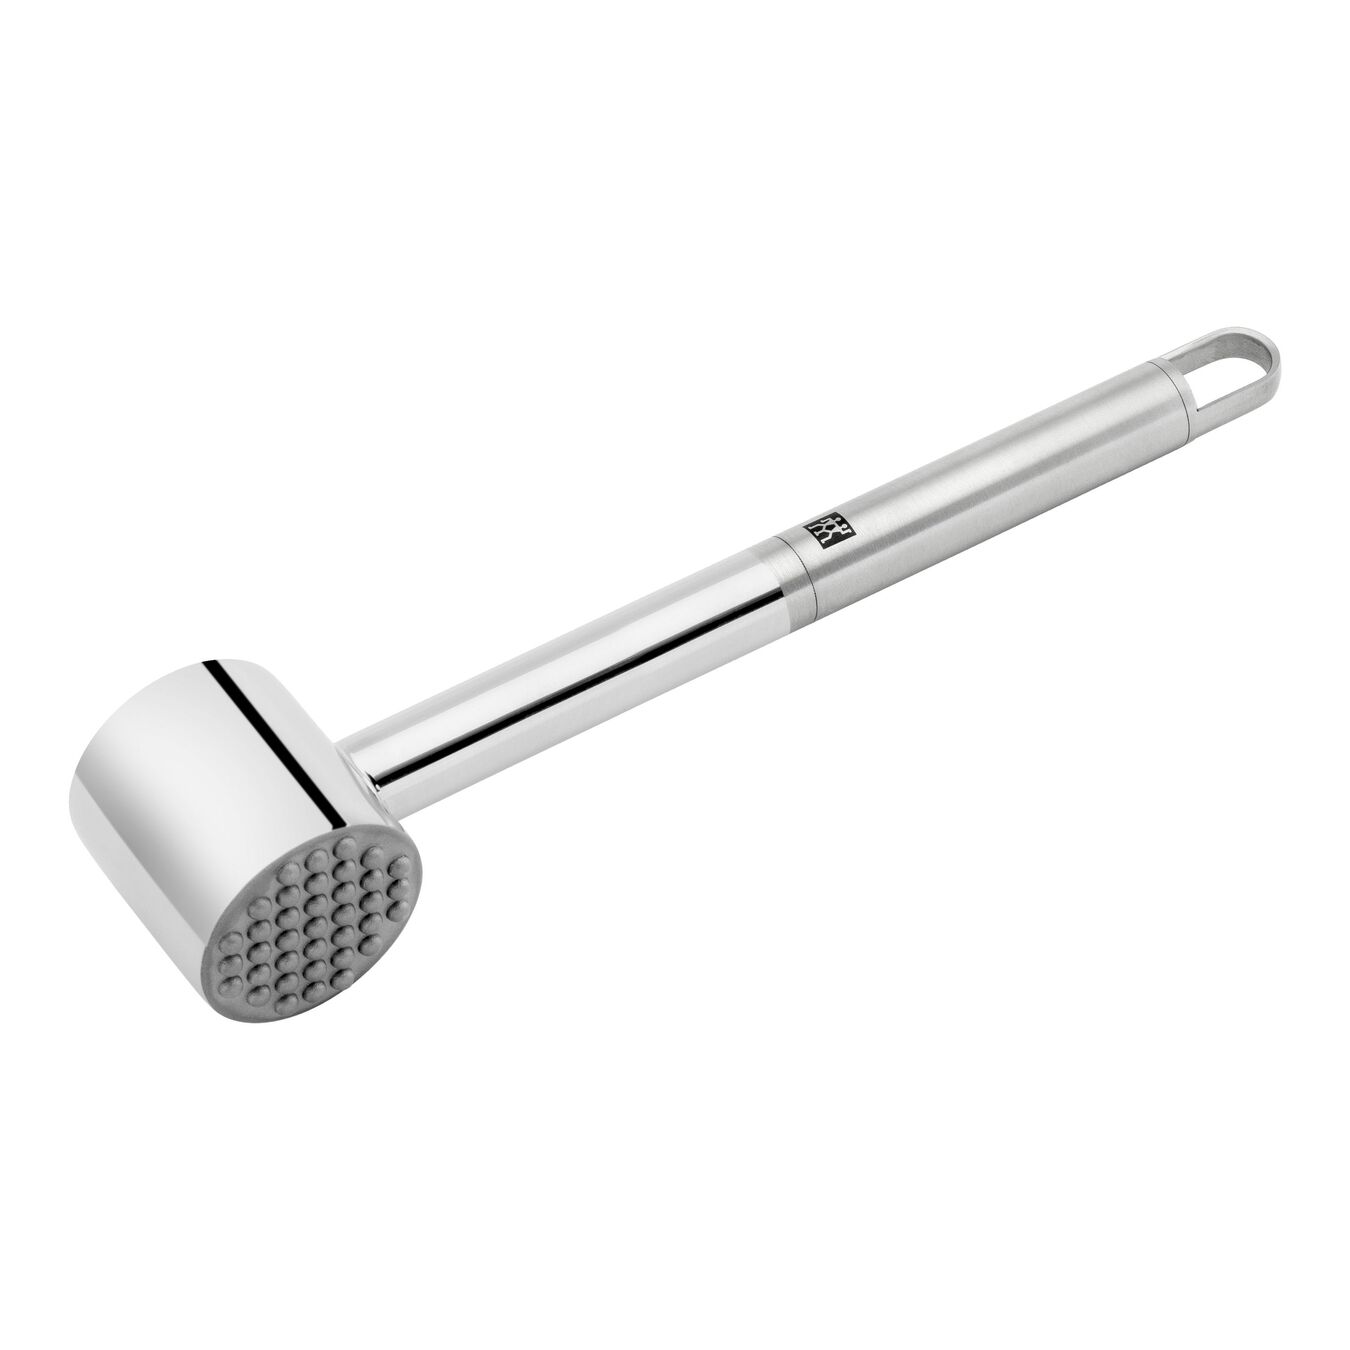 Meat tenderizer, 27 cm, 18/10 Stainless Steel,,large 1